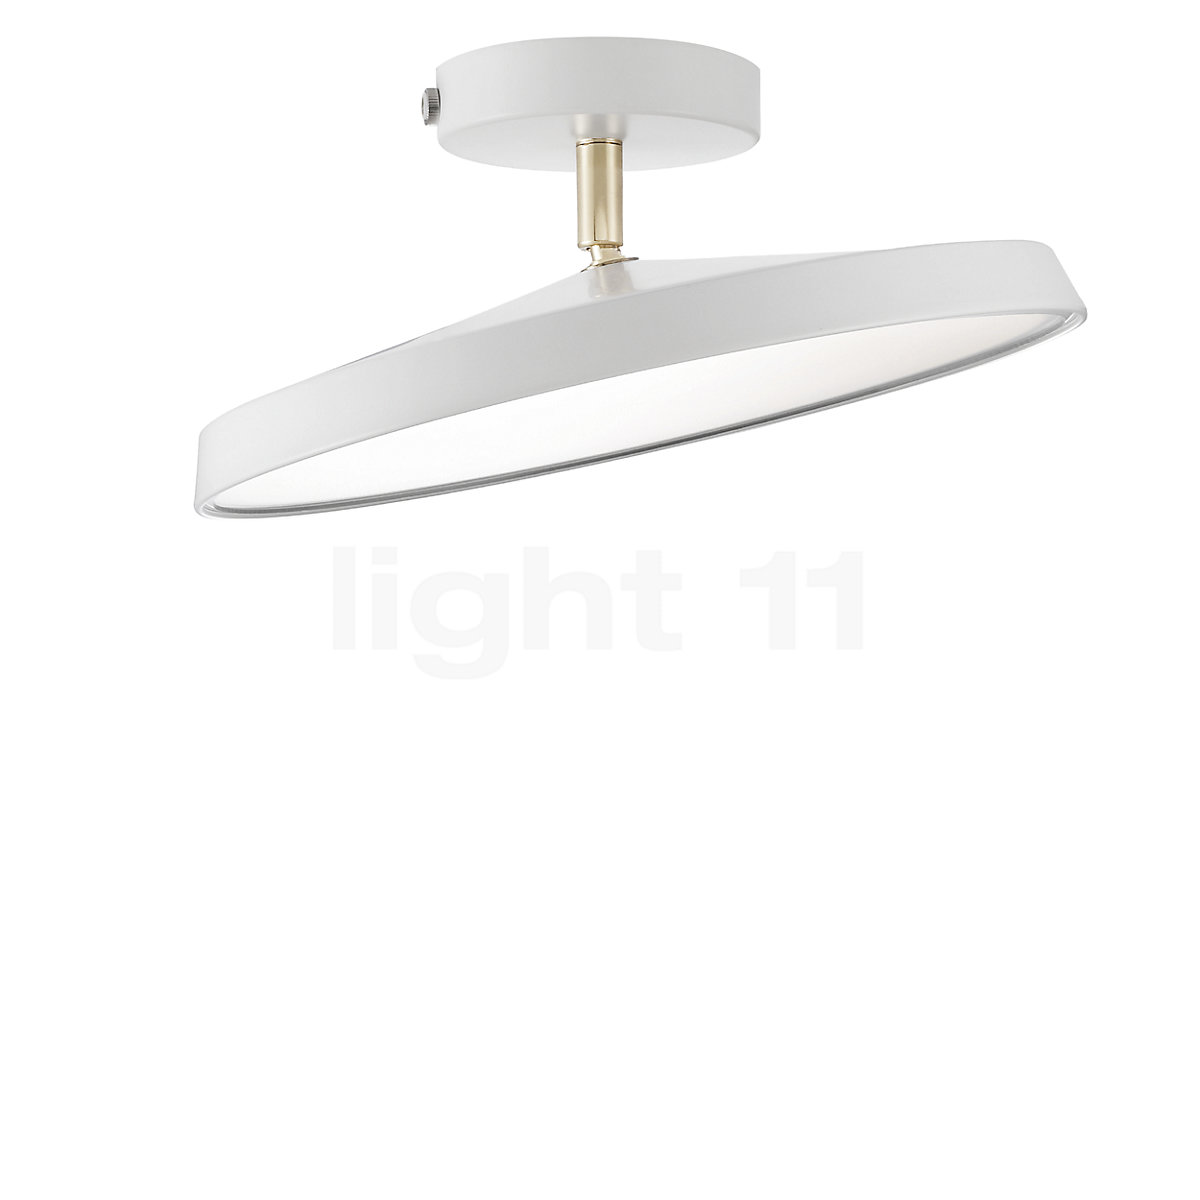 Buy Design for the People Kaito Pro Ceiling Light LED at | Deckenlampen